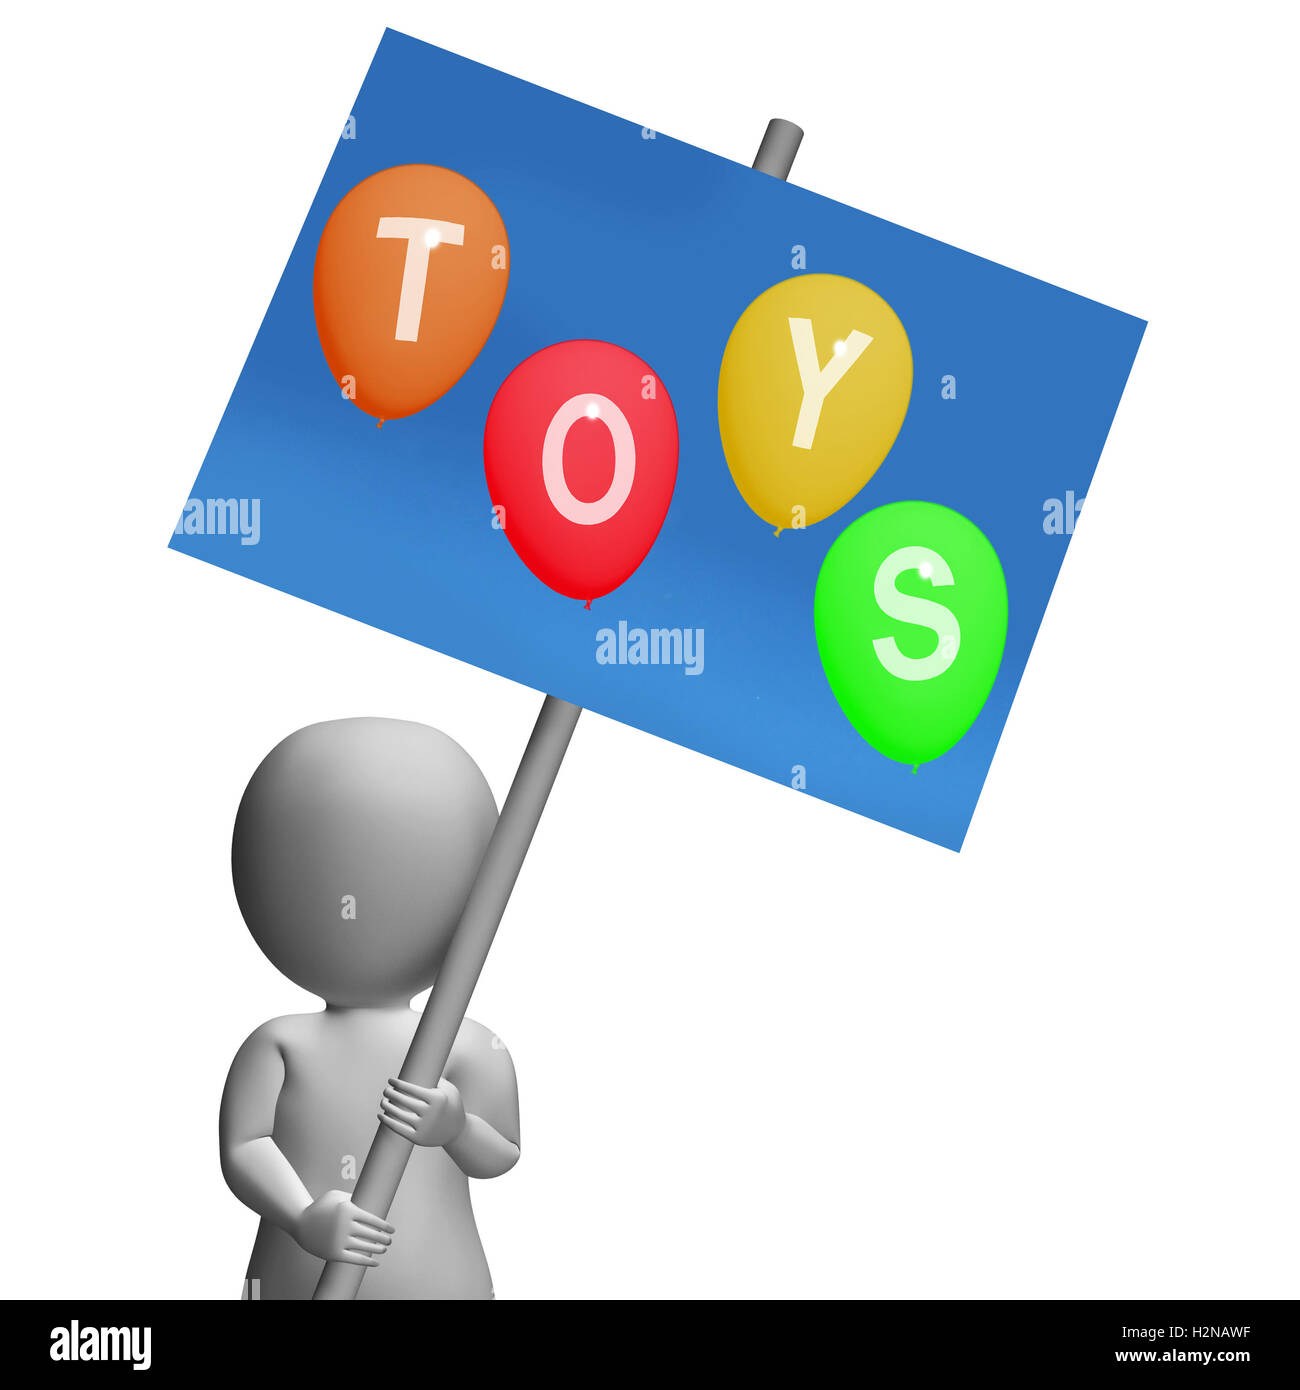 Toys Sign Representing Kids and Children's Playthings Stock Photo